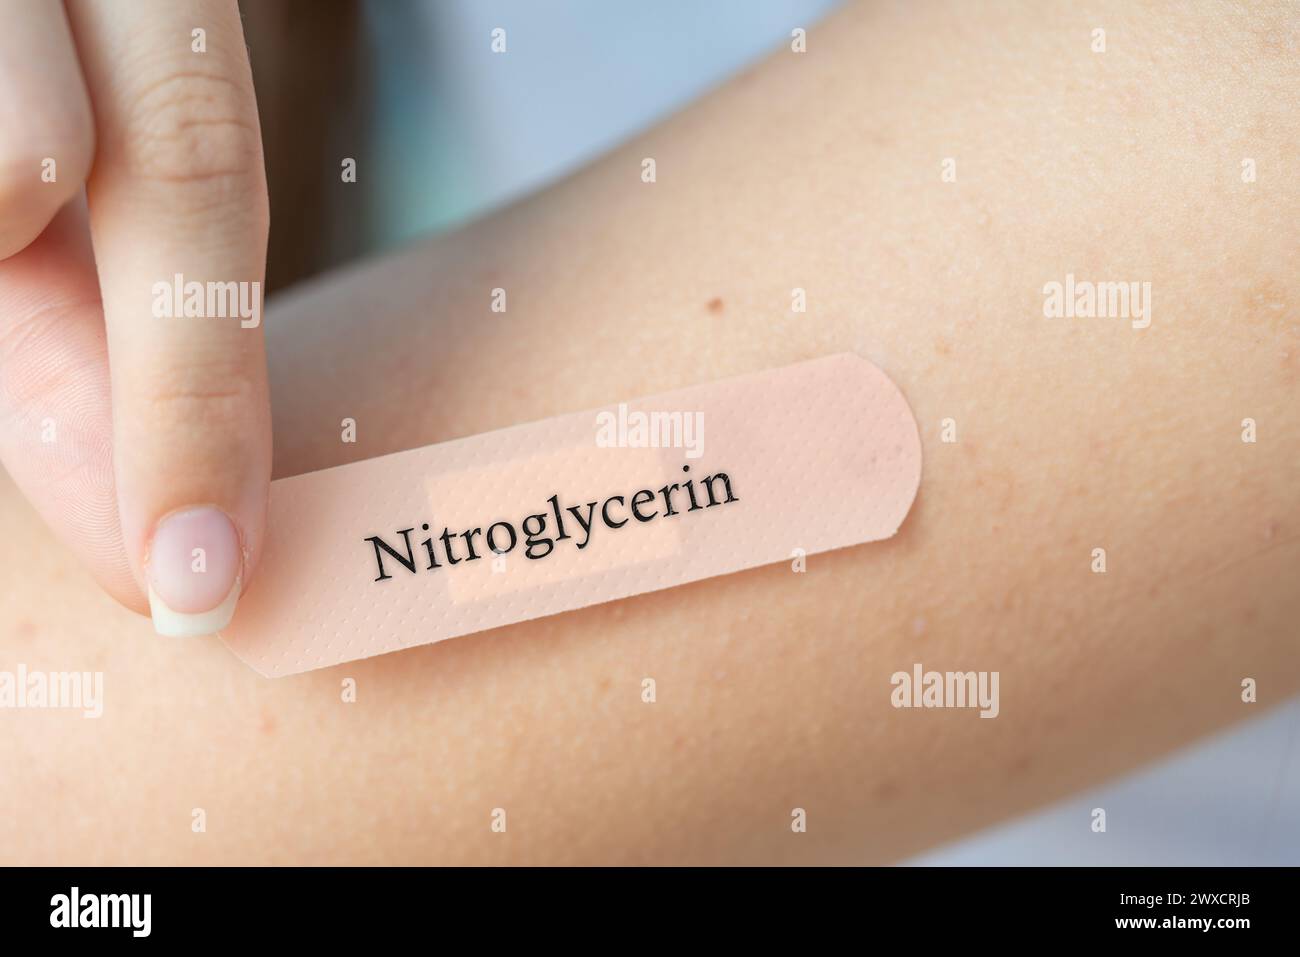 Nitroglycerin transdermal patch, conceptual image. Treats angina and heart conditions by relaxing blood vessels. Stock Photo